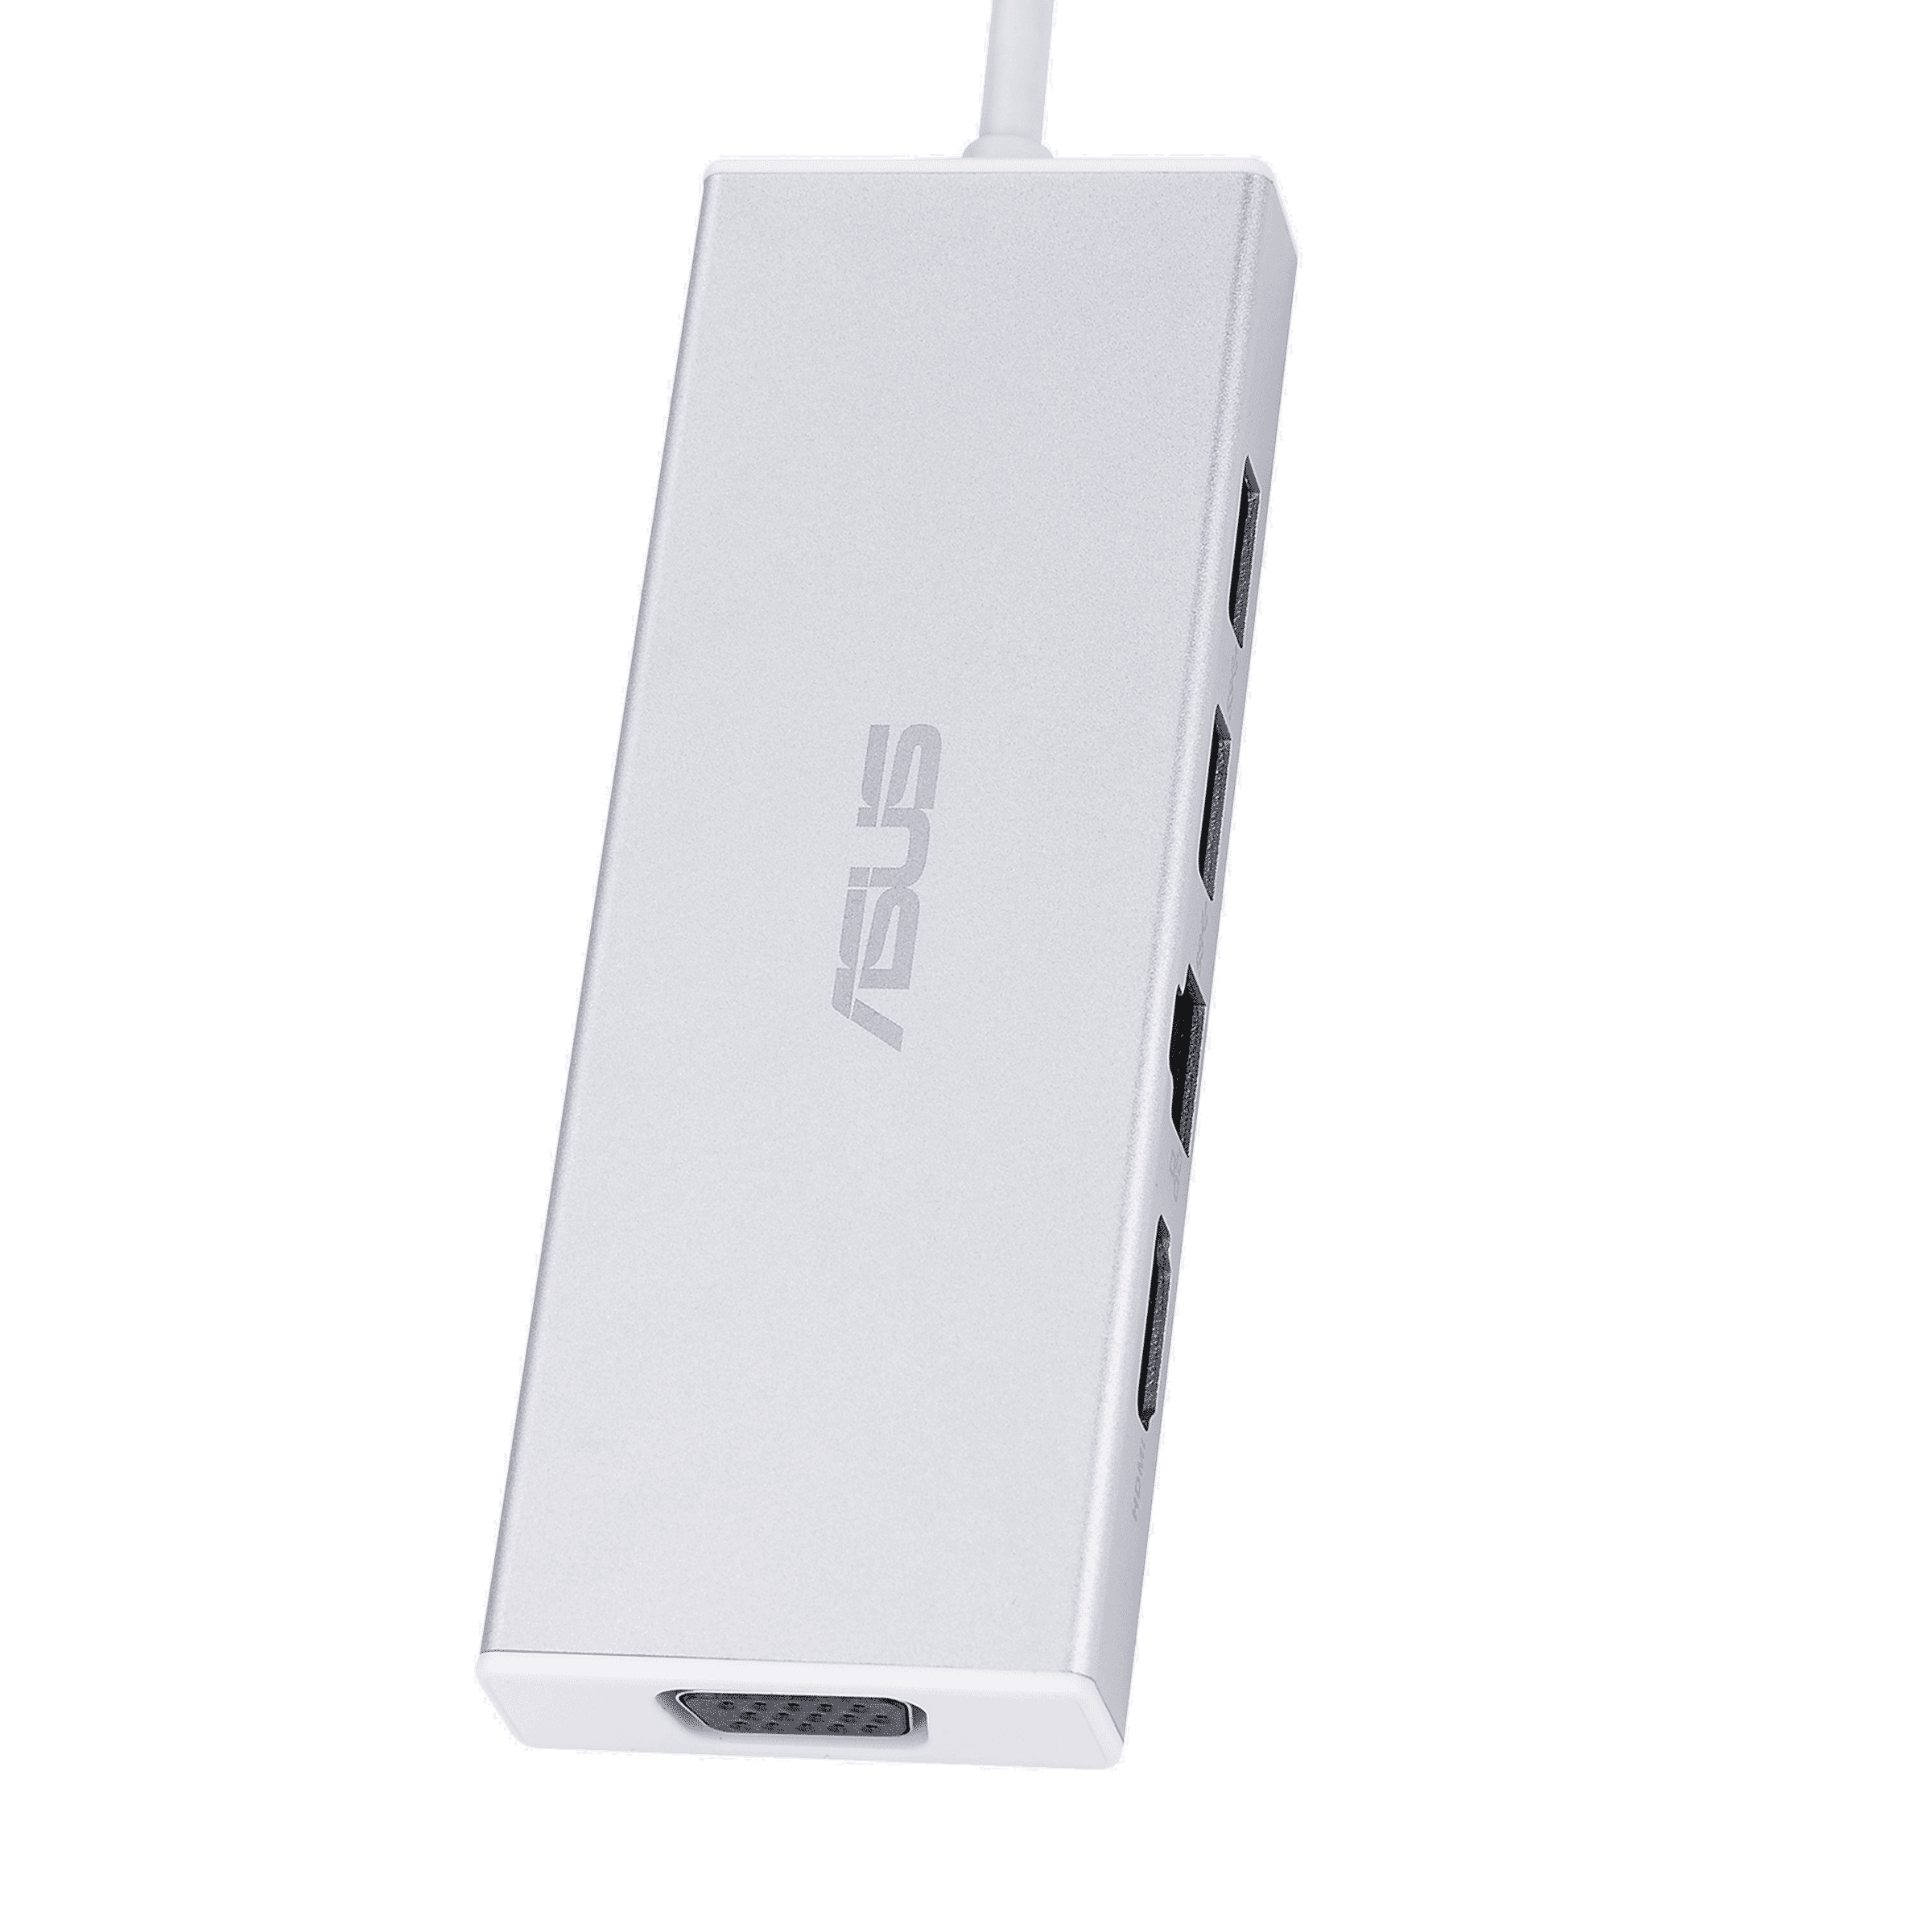 ASUS OS200 USB-C DONGLE｜Docks, Dongles and Cable｜ASUS USA